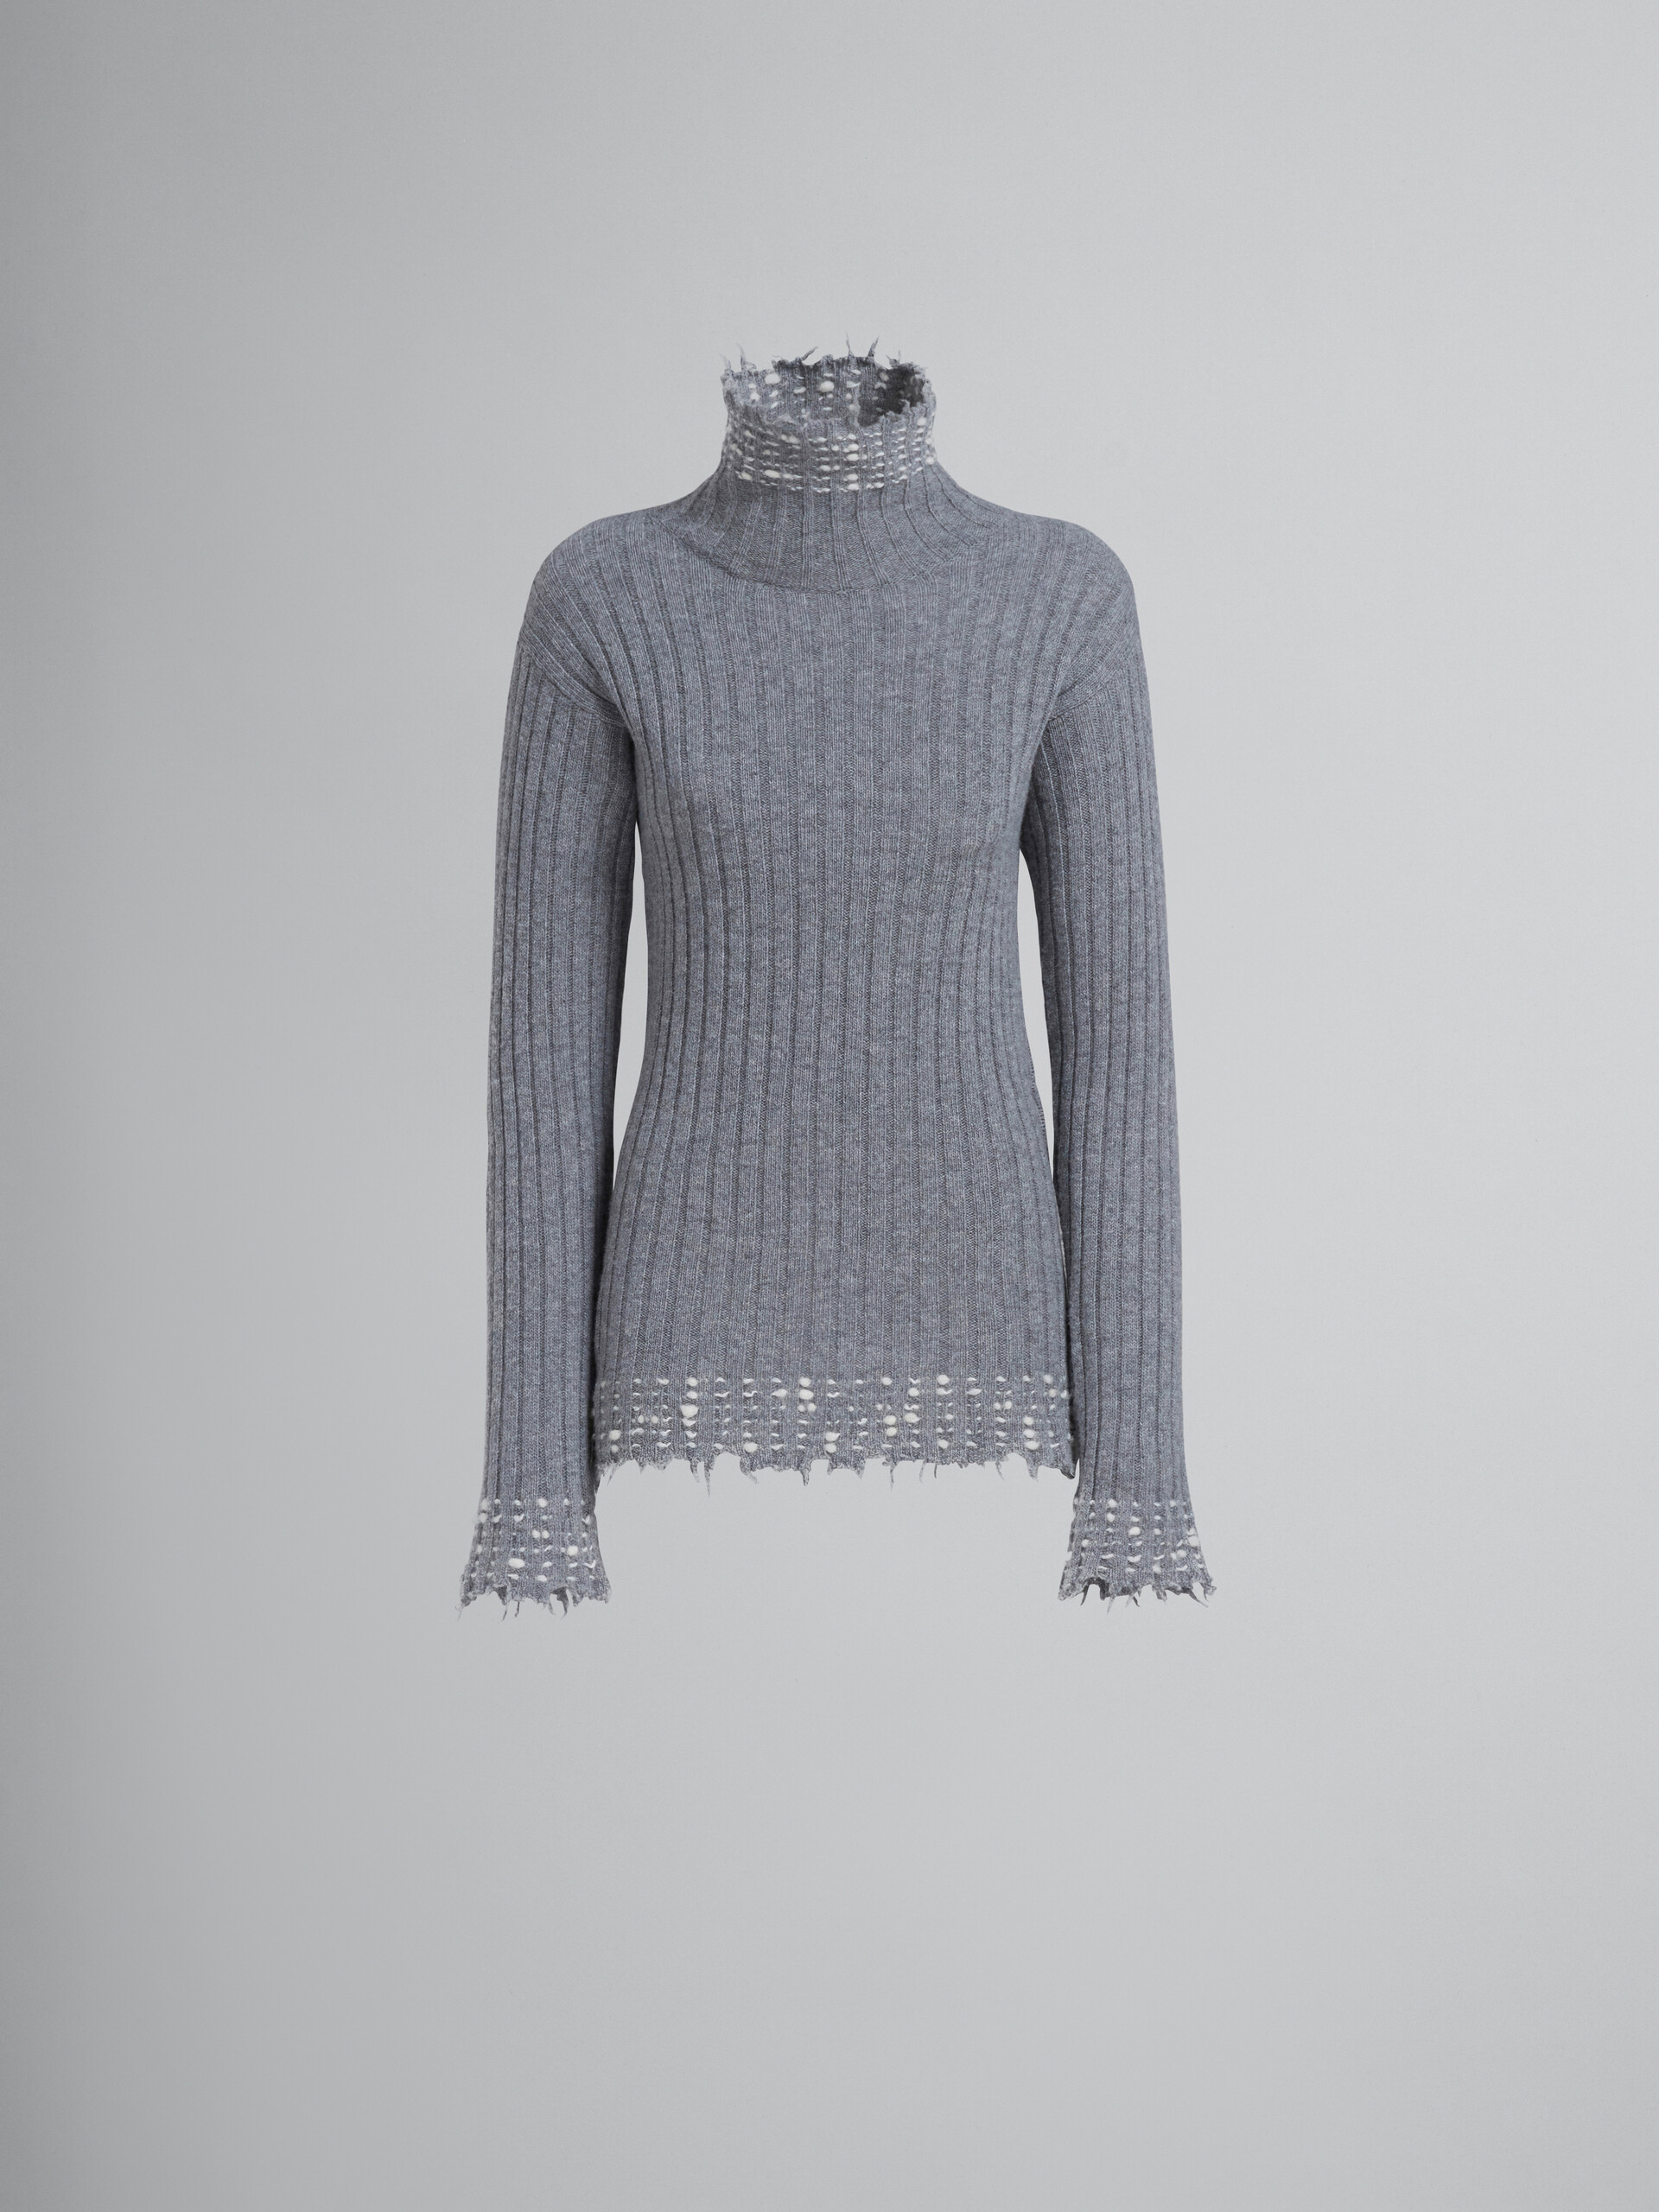 Grey knitted turtleneck - Pullovers - Image 1